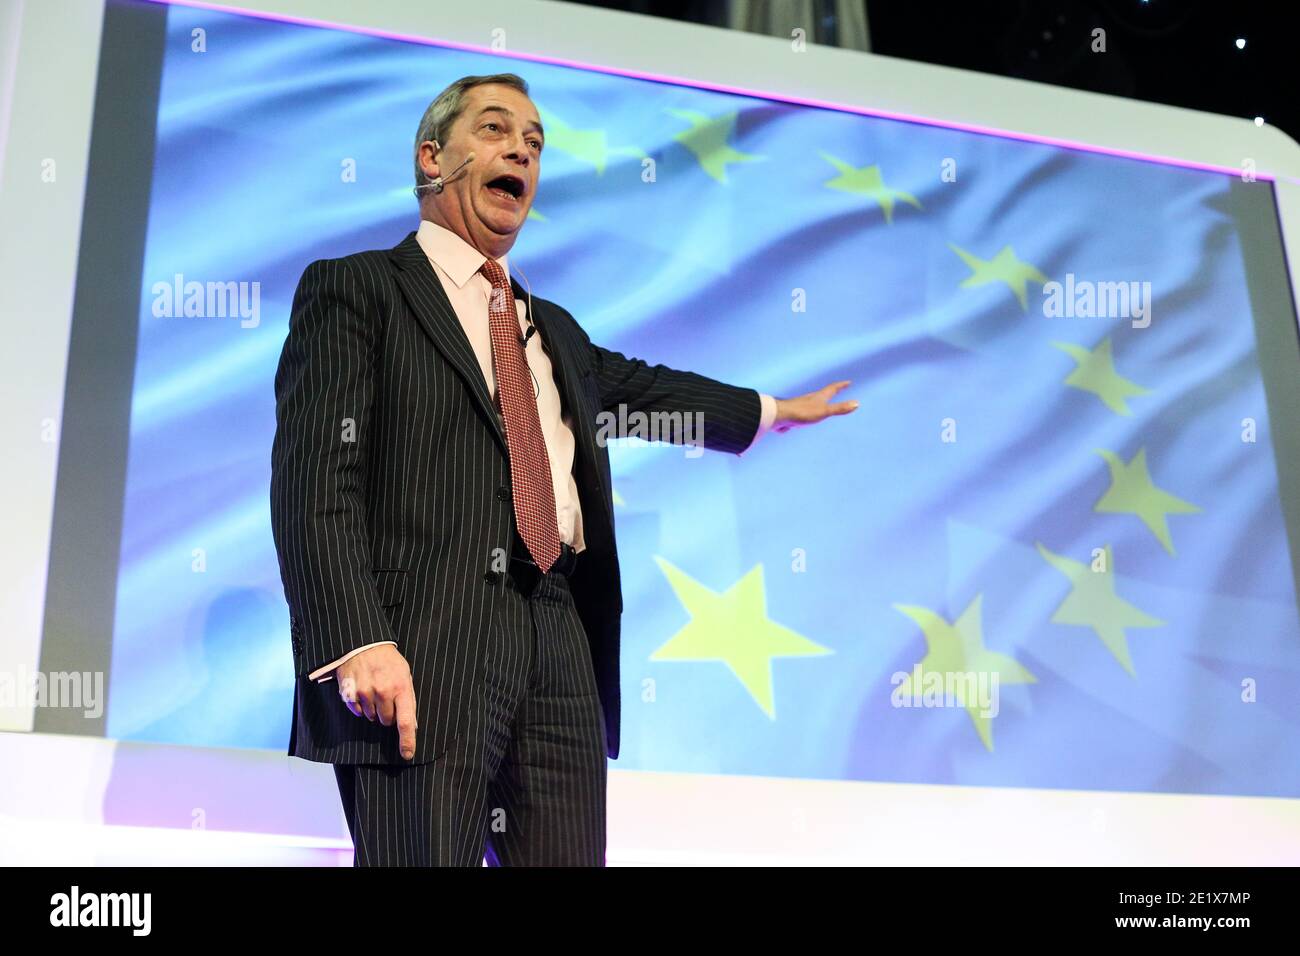 30/11/15. Leeds, UK. UKIP leader Nigel Farage in front of an EU flag during a UKIP event at Leeds United's Elland Road ground in West Yorkshire in the Stock Photo